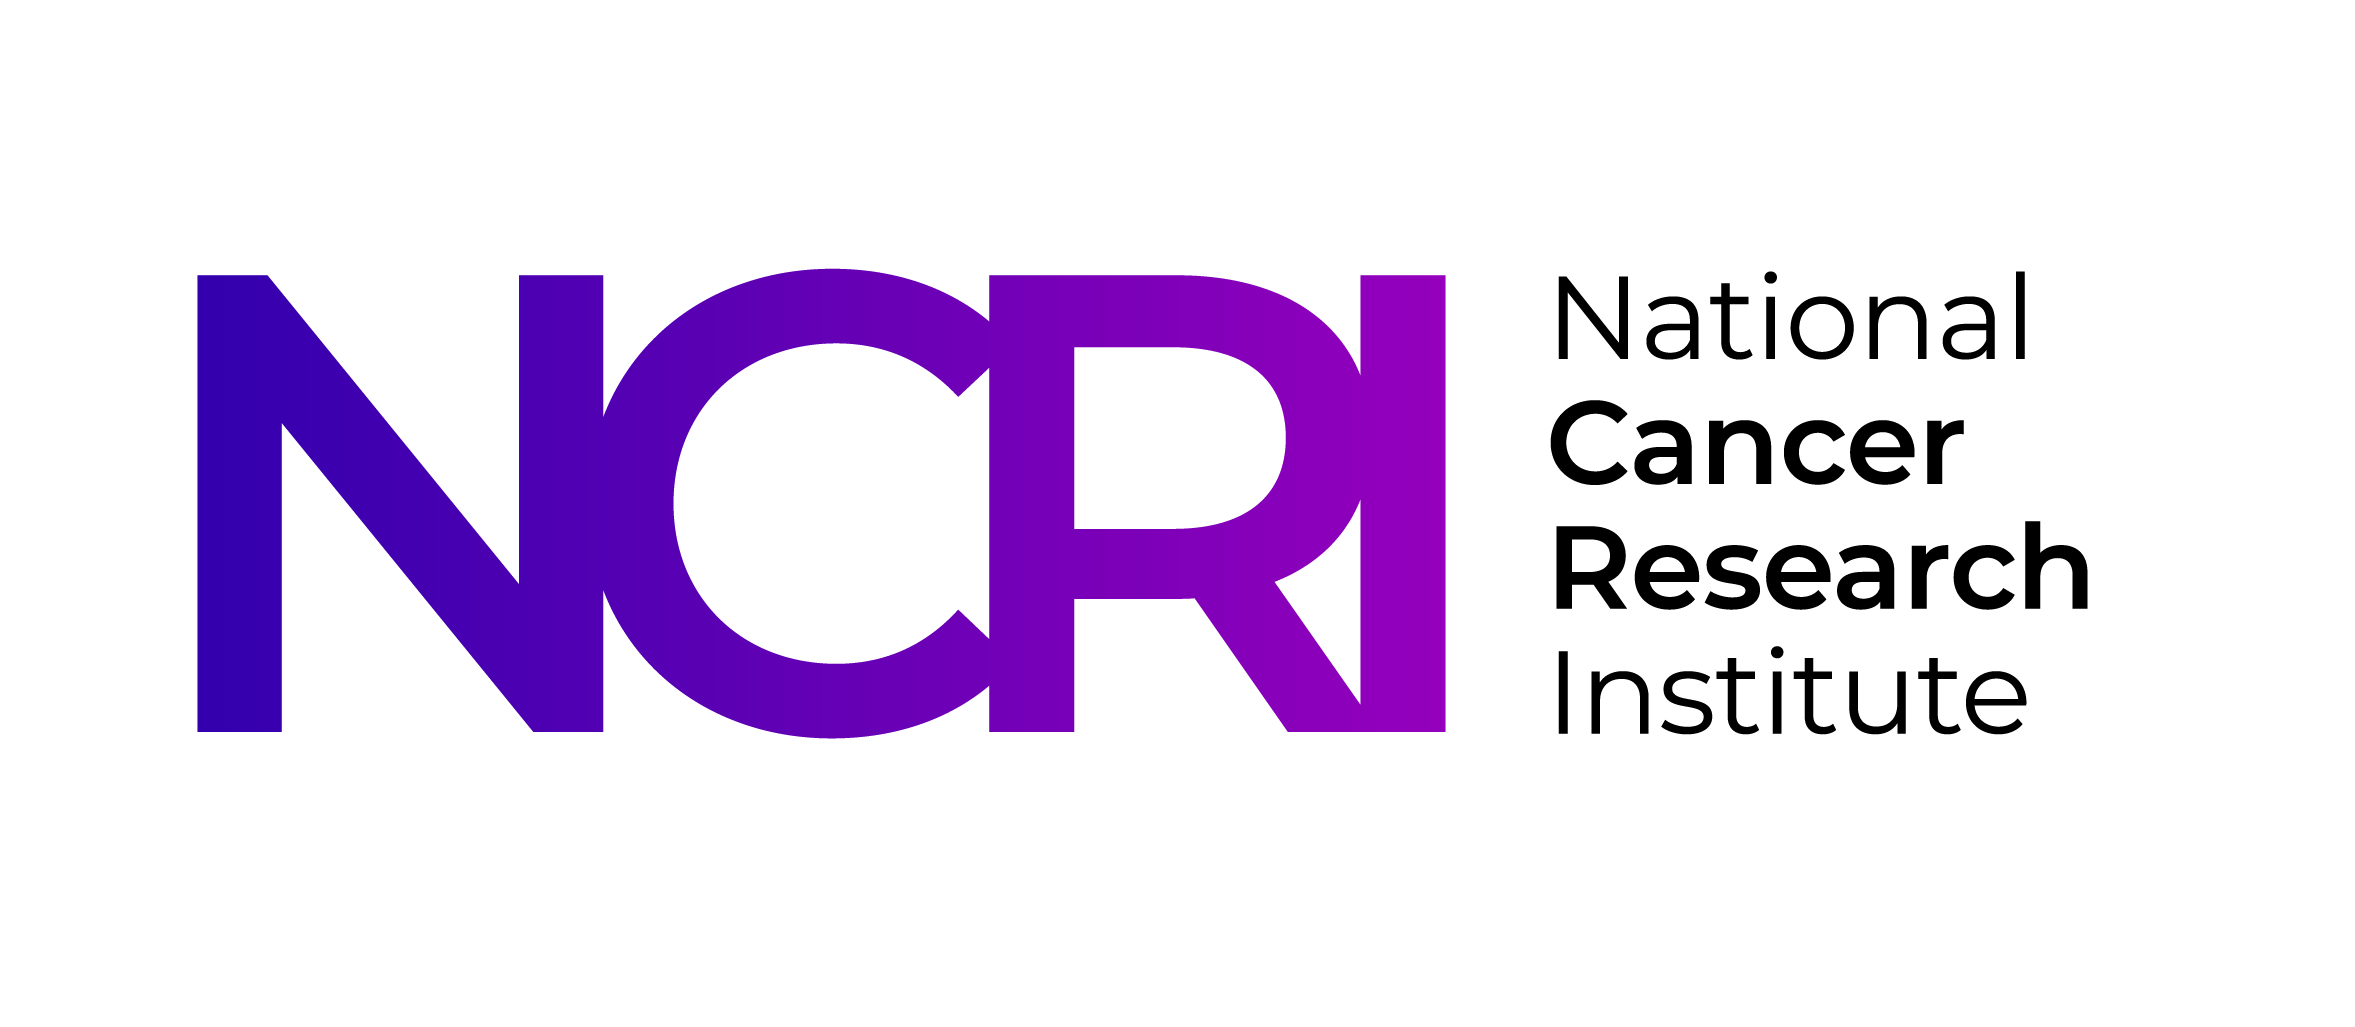 National Cancer Research Institute (NCRI)